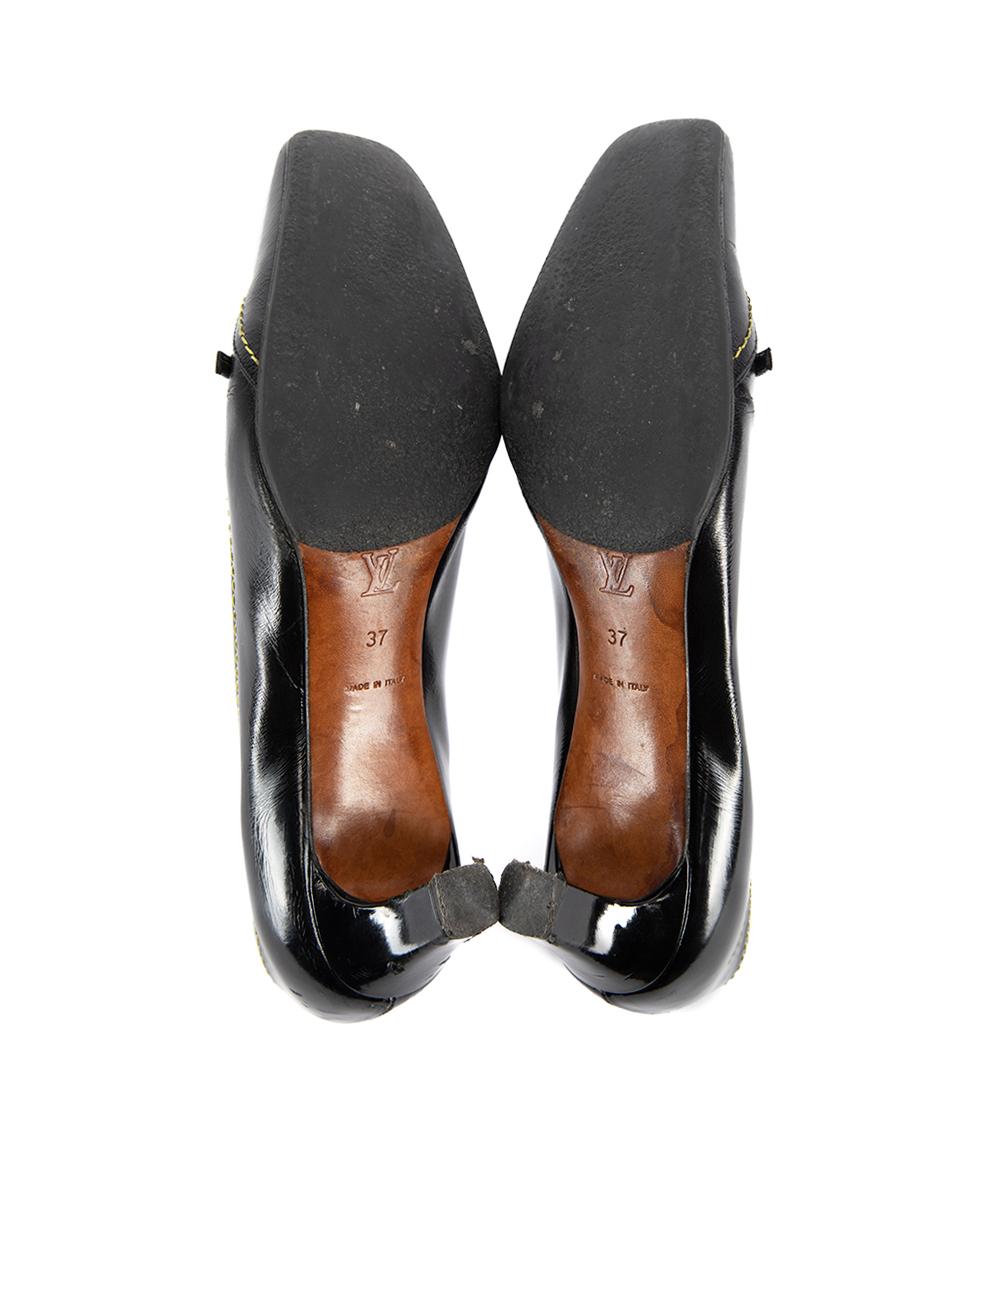 Pre-Loved Louis Vuitton Women's Vintage Black Leather Contrast Stitch Pumps In Excellent Condition In London, GB